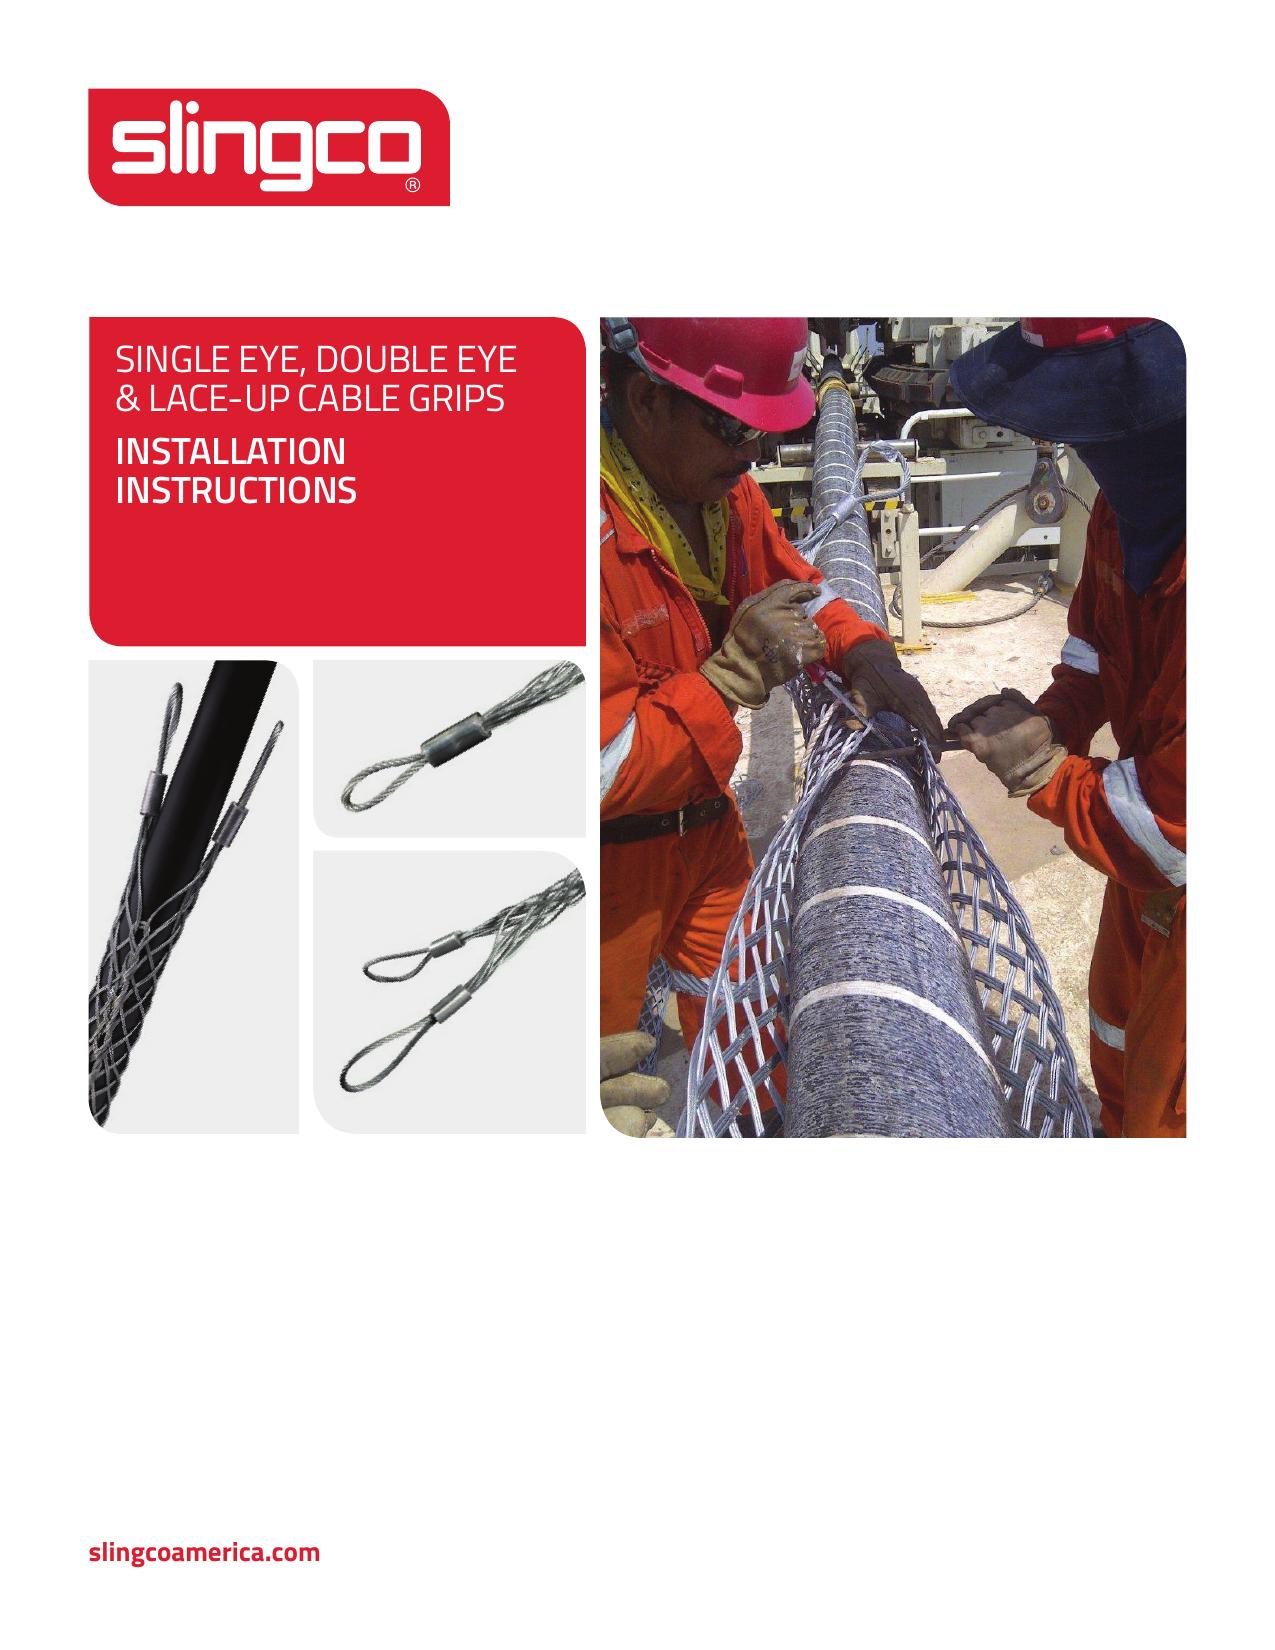 Single Eye, Double Eye and Lace Up Cable Grip Installation Instructions